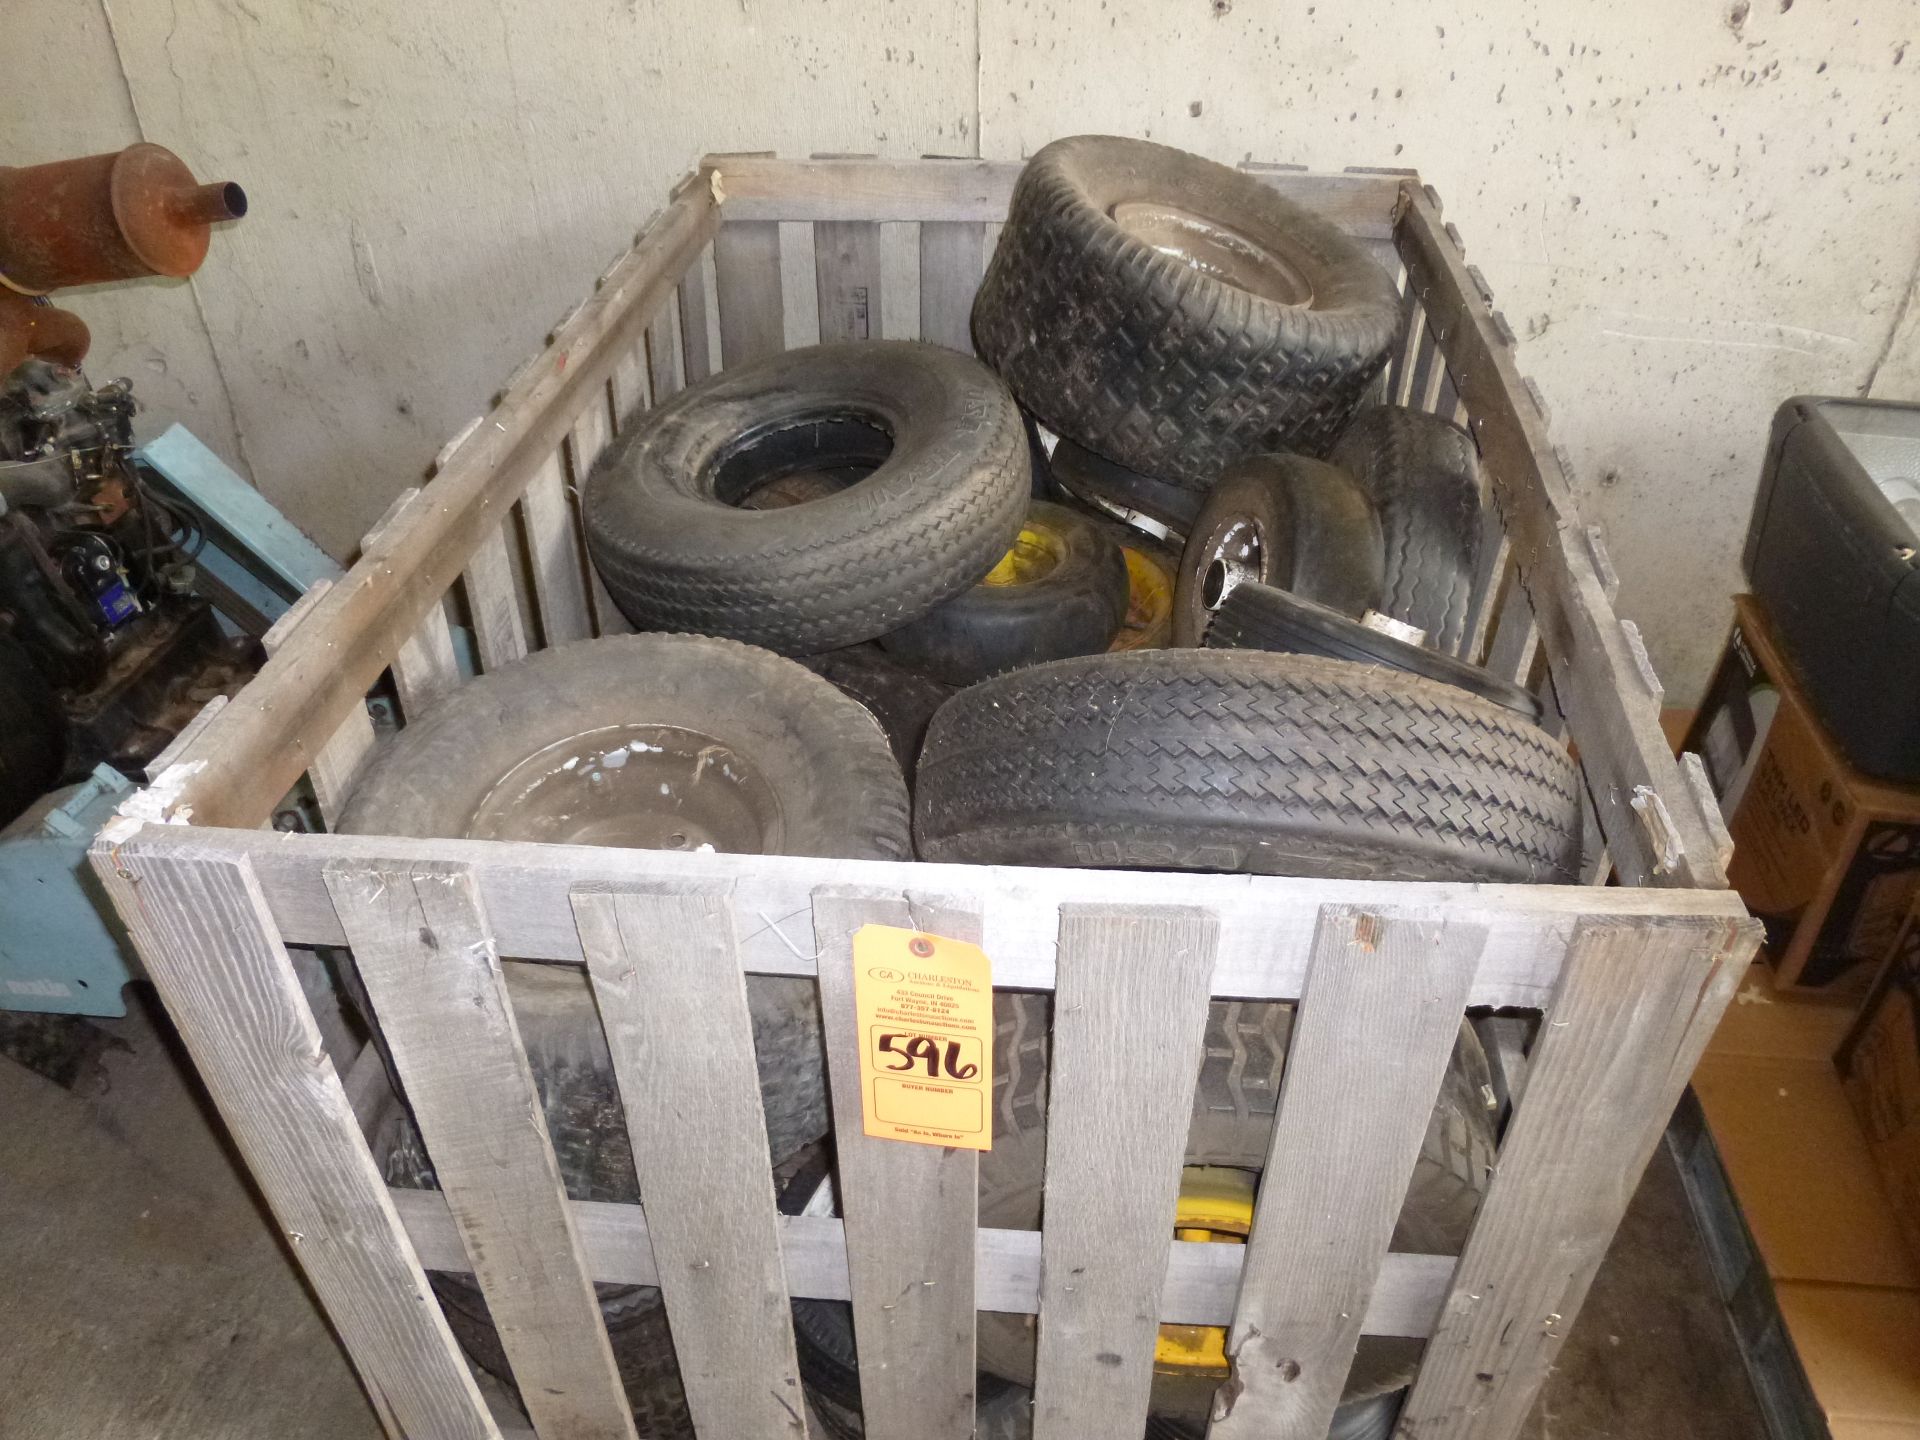 Hopper of wheels and tires for mowers and small trailers, some are used and some are new old stock